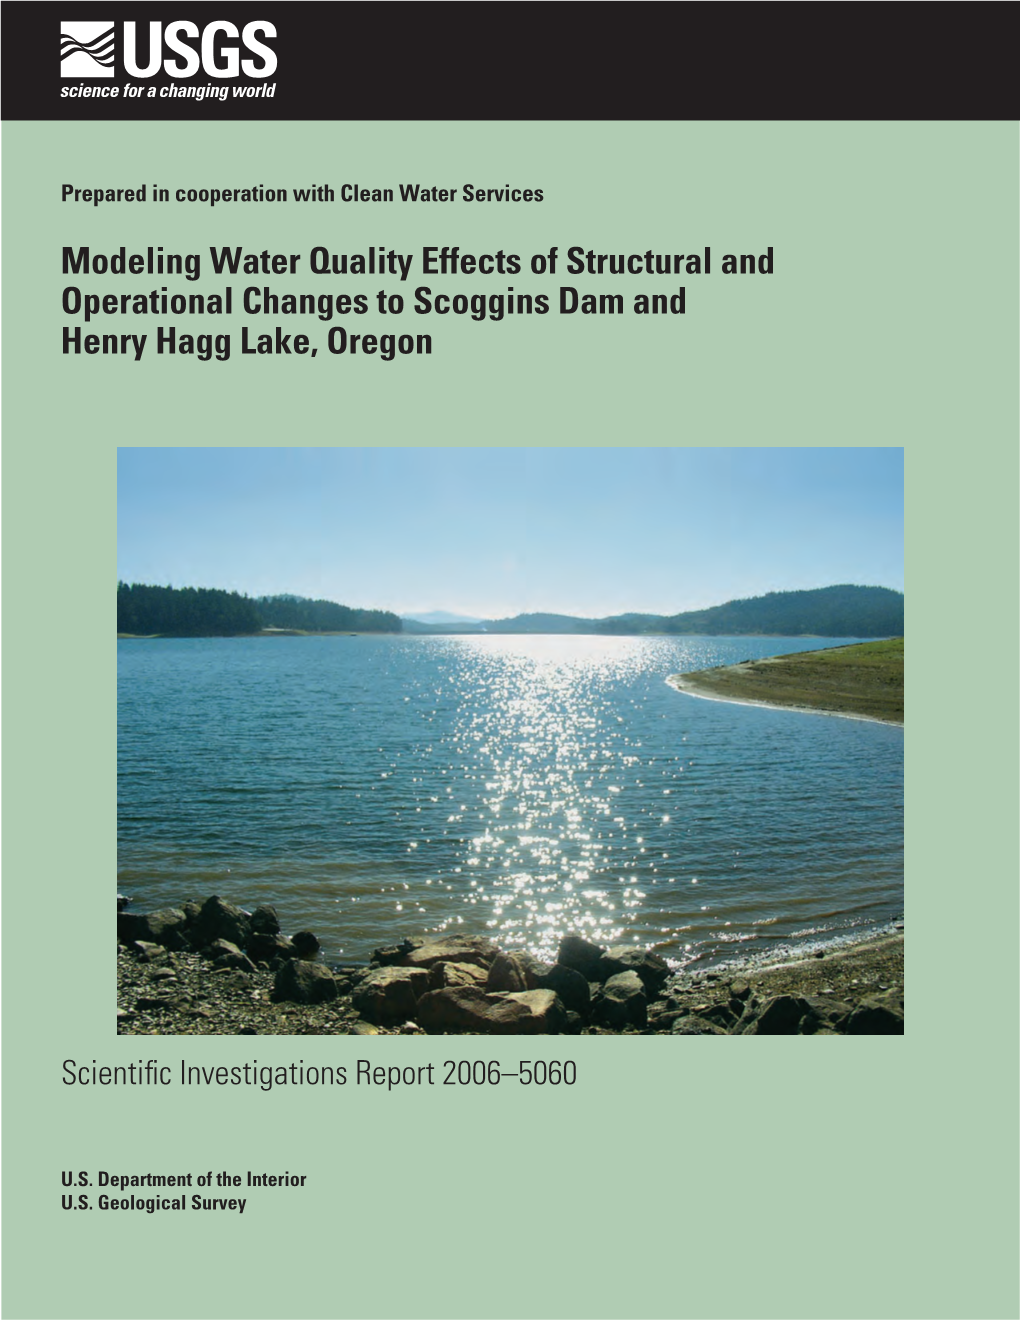 Modeling Water Quality Effects of Structural and Operational Changes to Scoggins Dam and Henry Hagg Lake, Oregon